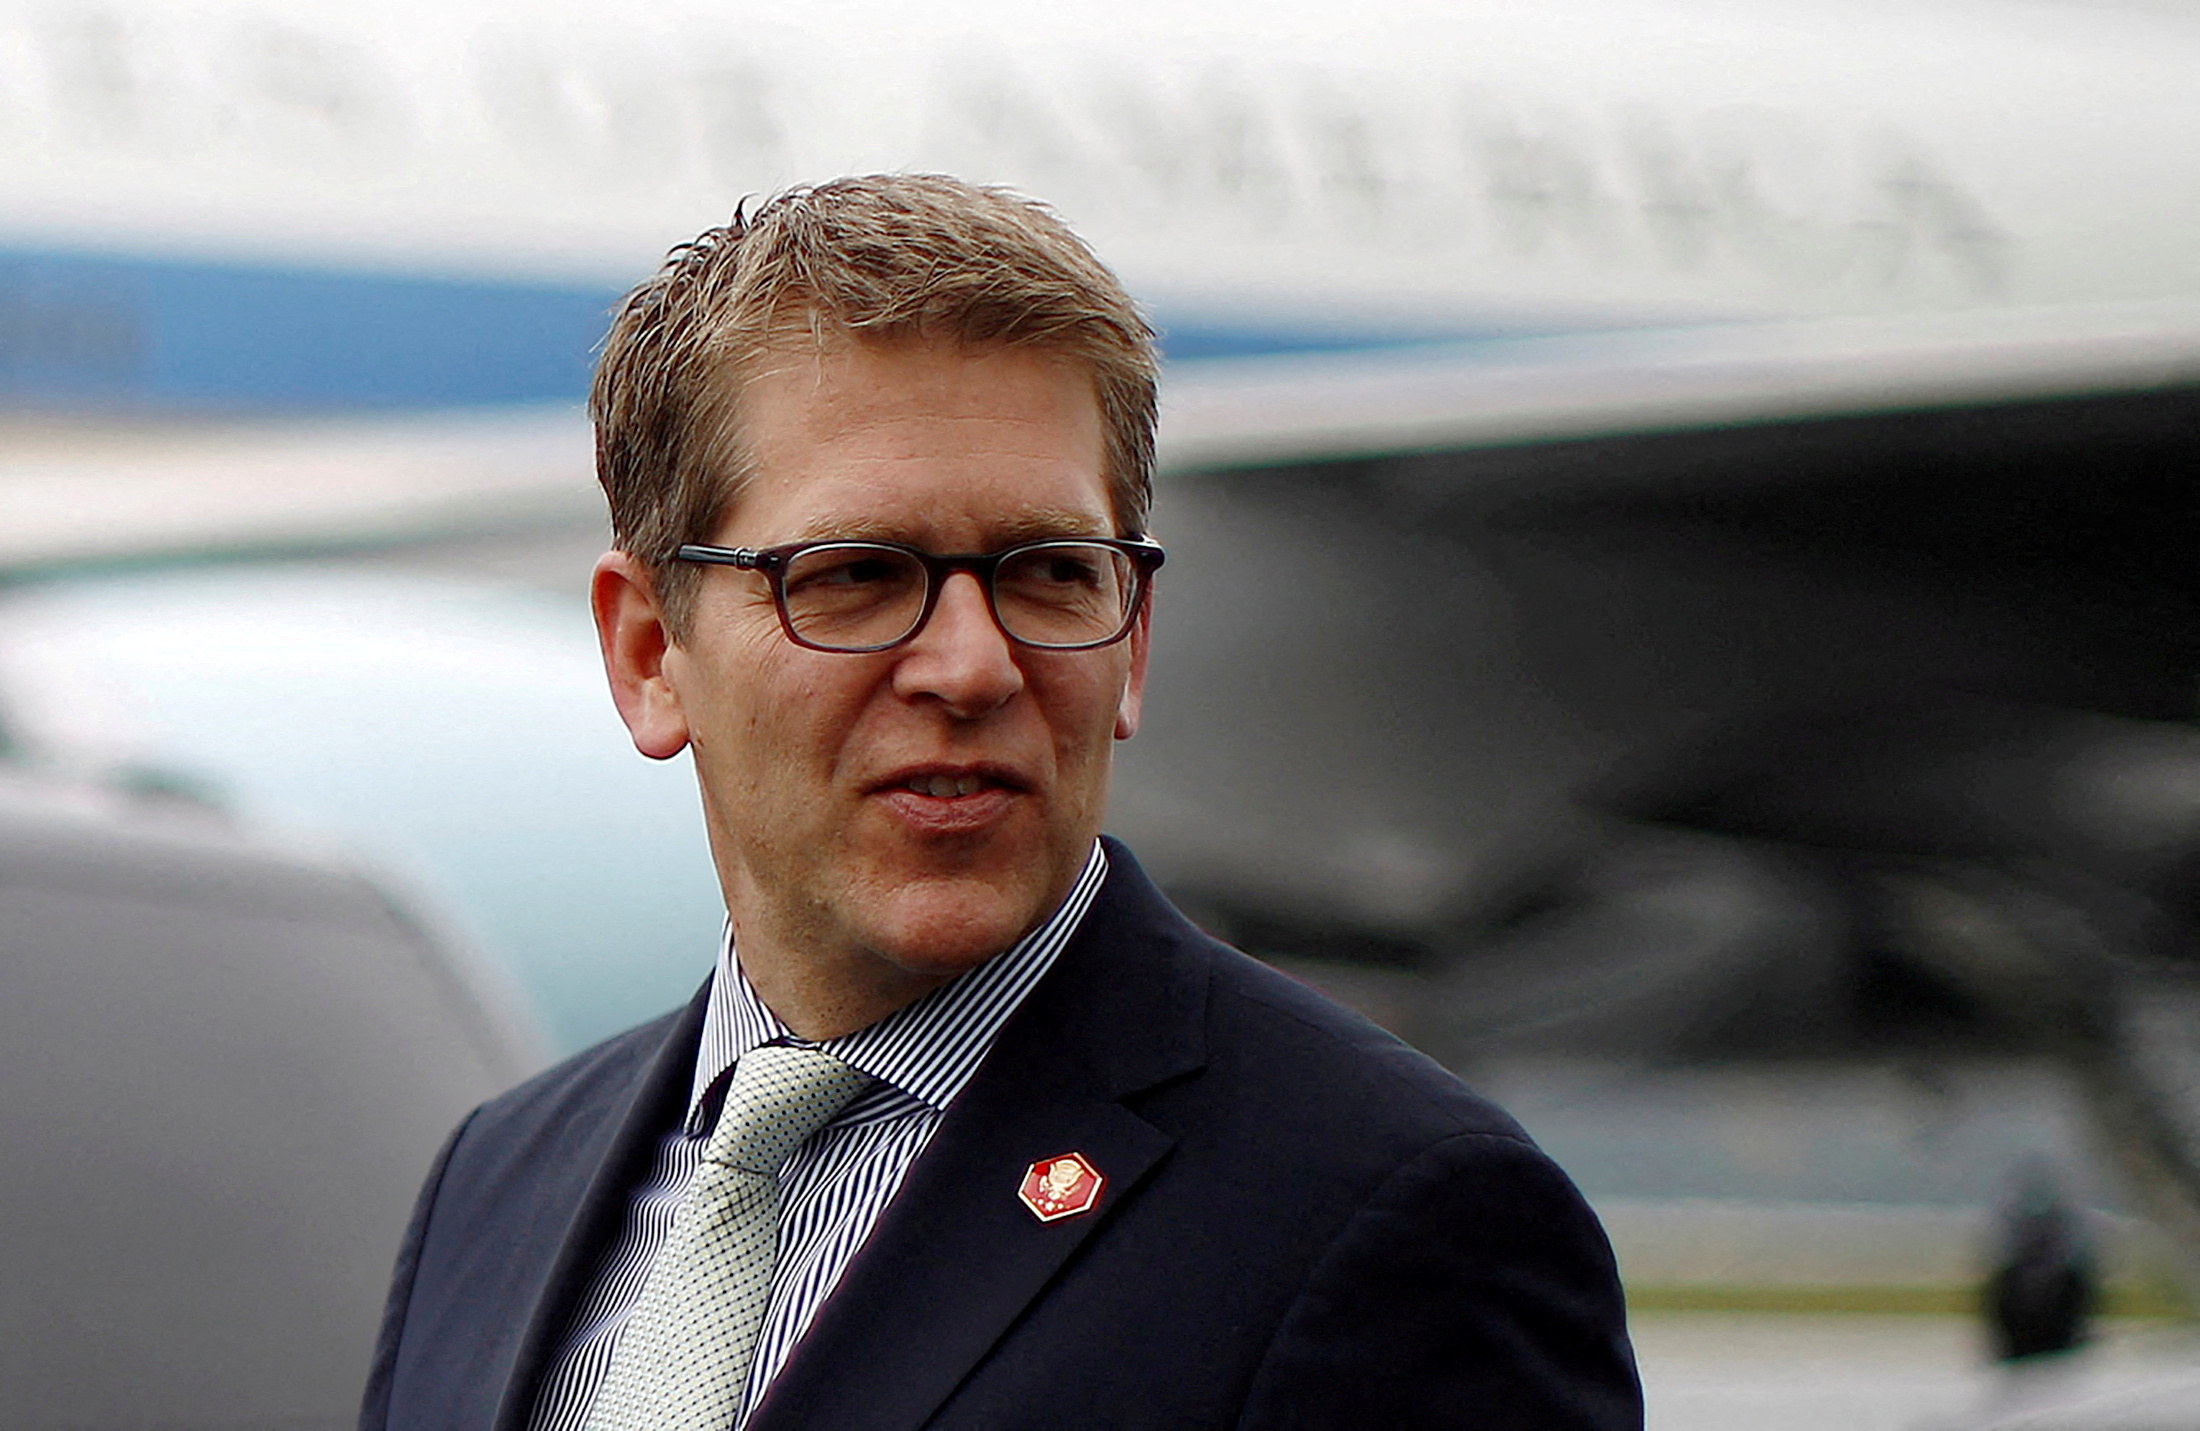  Then-White House Press Secretary Jay Carney is pictured upon his arrival in Swanton, Ohio, U.S., September 26, 2012. REUTERS/Jason Reed/File Photo